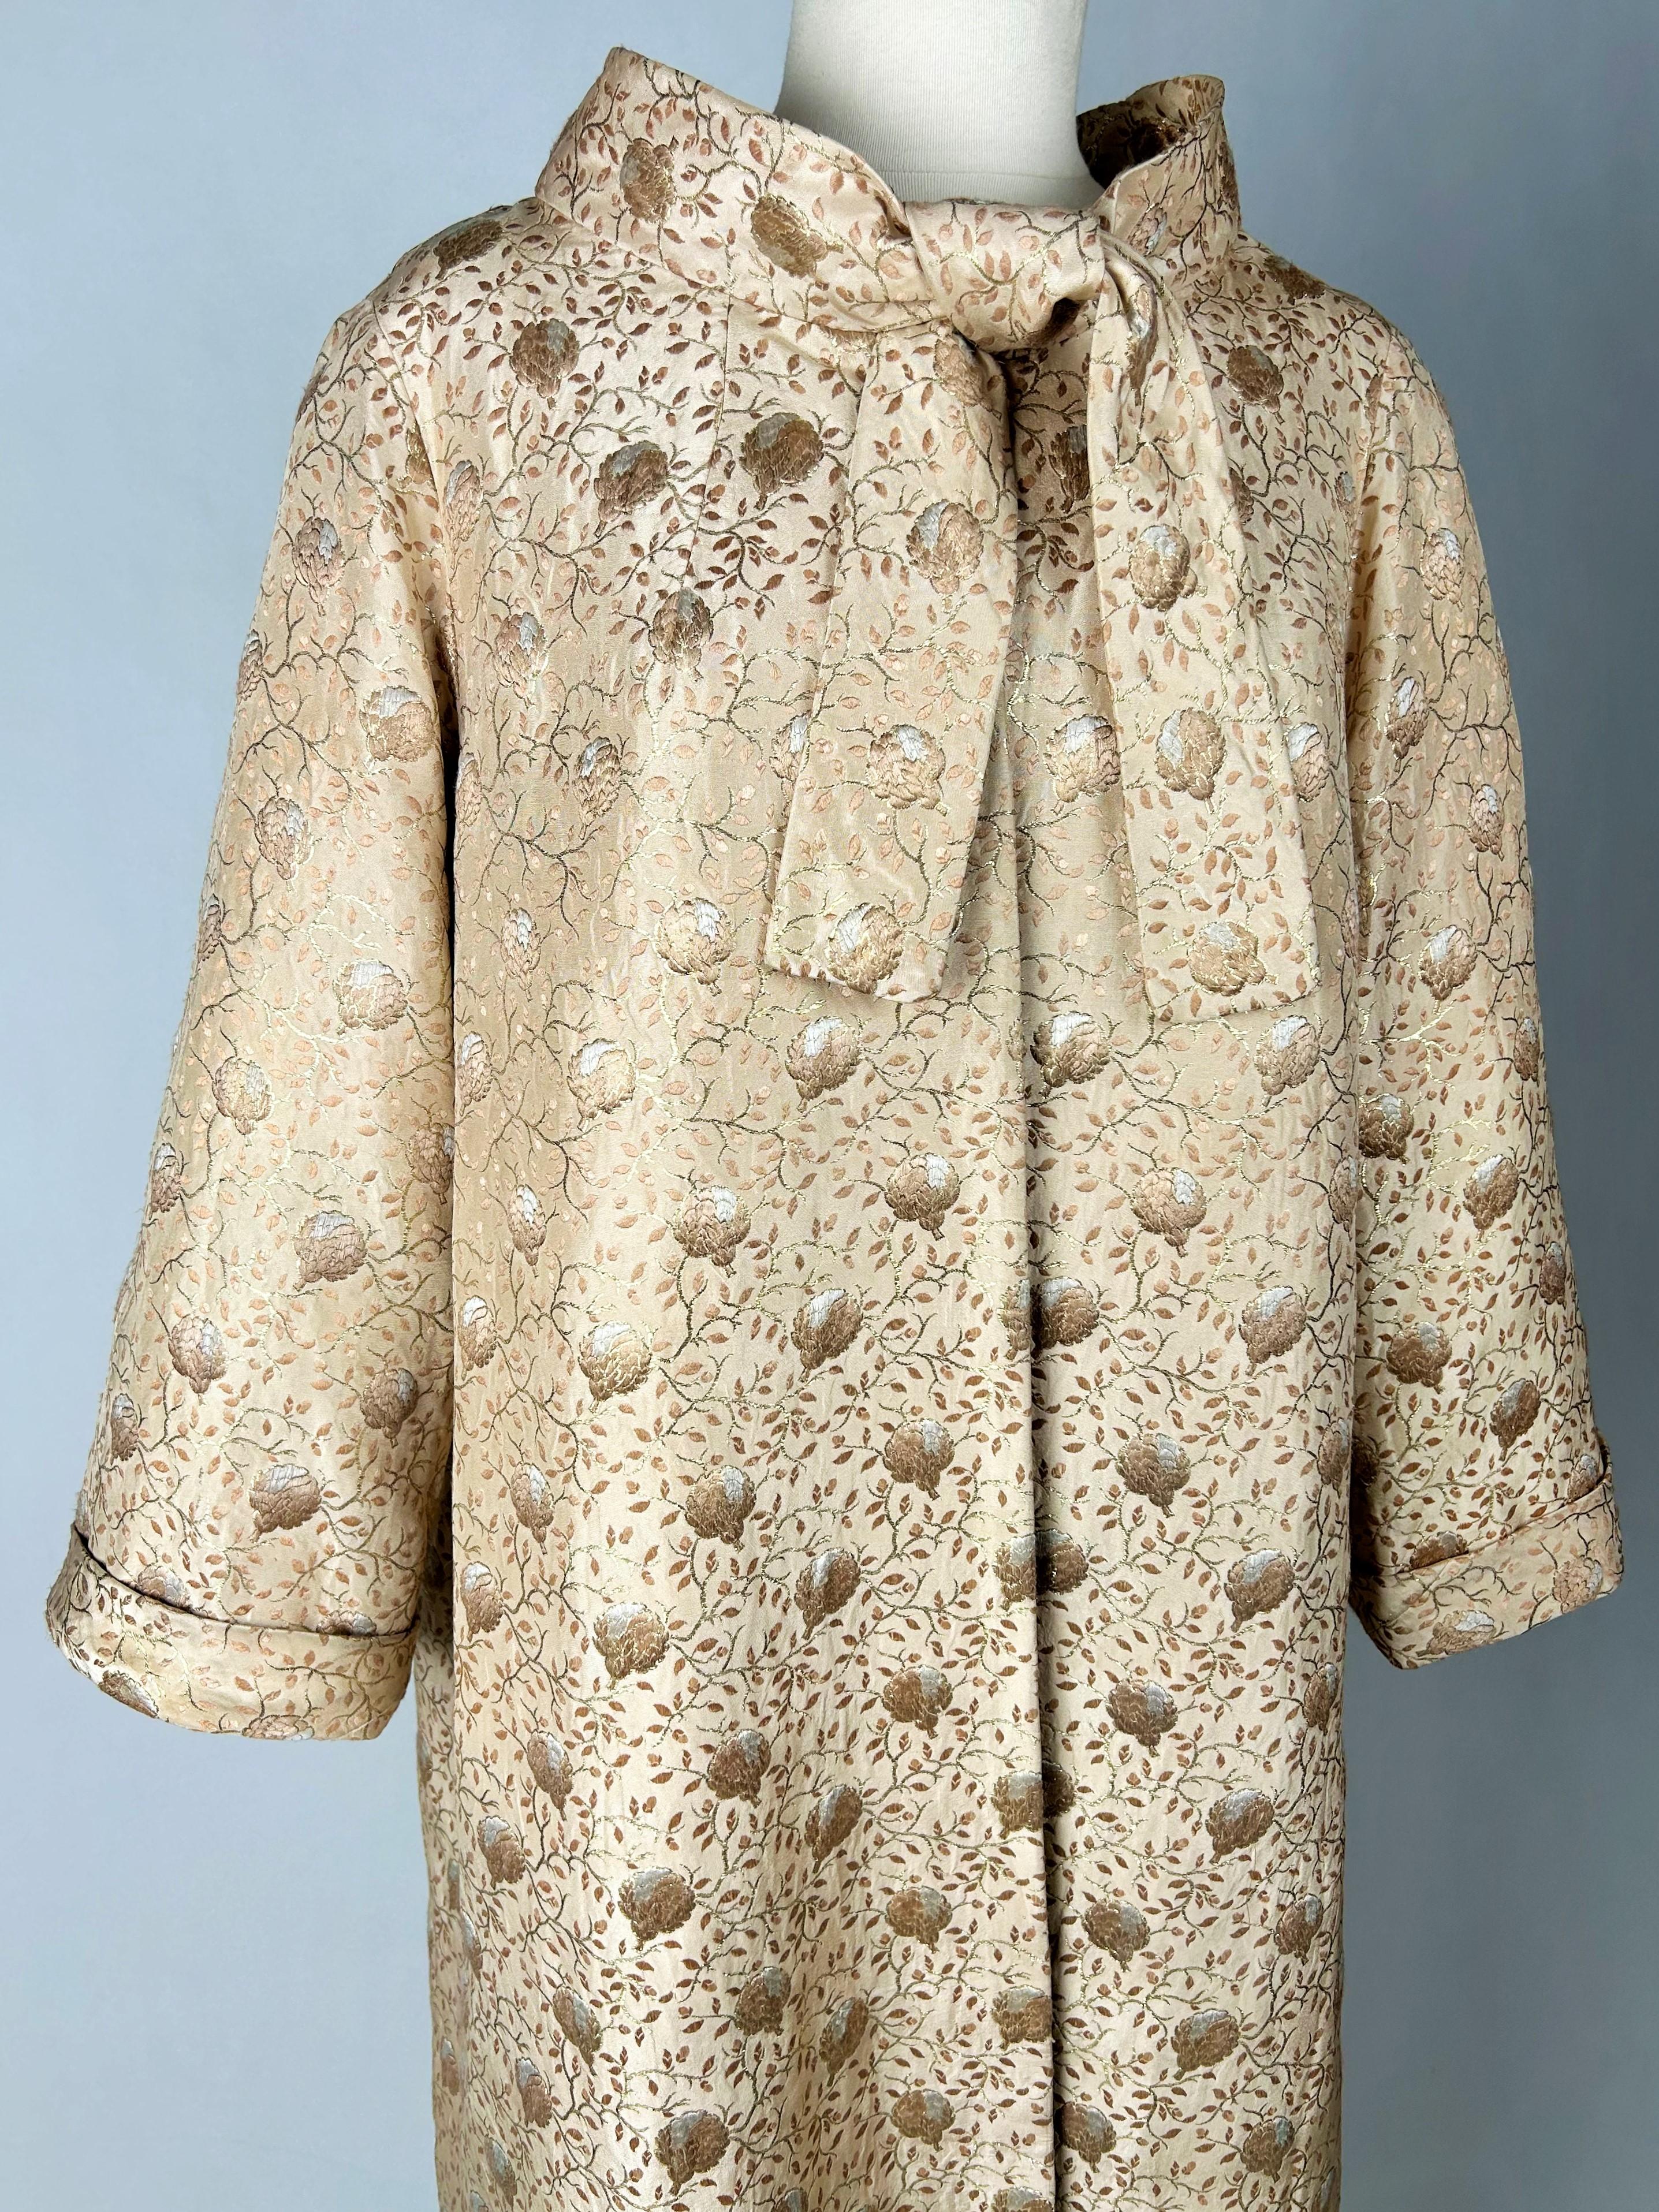 Circa 1955-1960

France

Evening or formal coat by Jean Dessès Haute Couture dating from the late 1950s. Loose fit, flared at the bottom with long sleeves and small cuffs. The neckline has a claudine collar and is tied in front.  Beautiful brocade